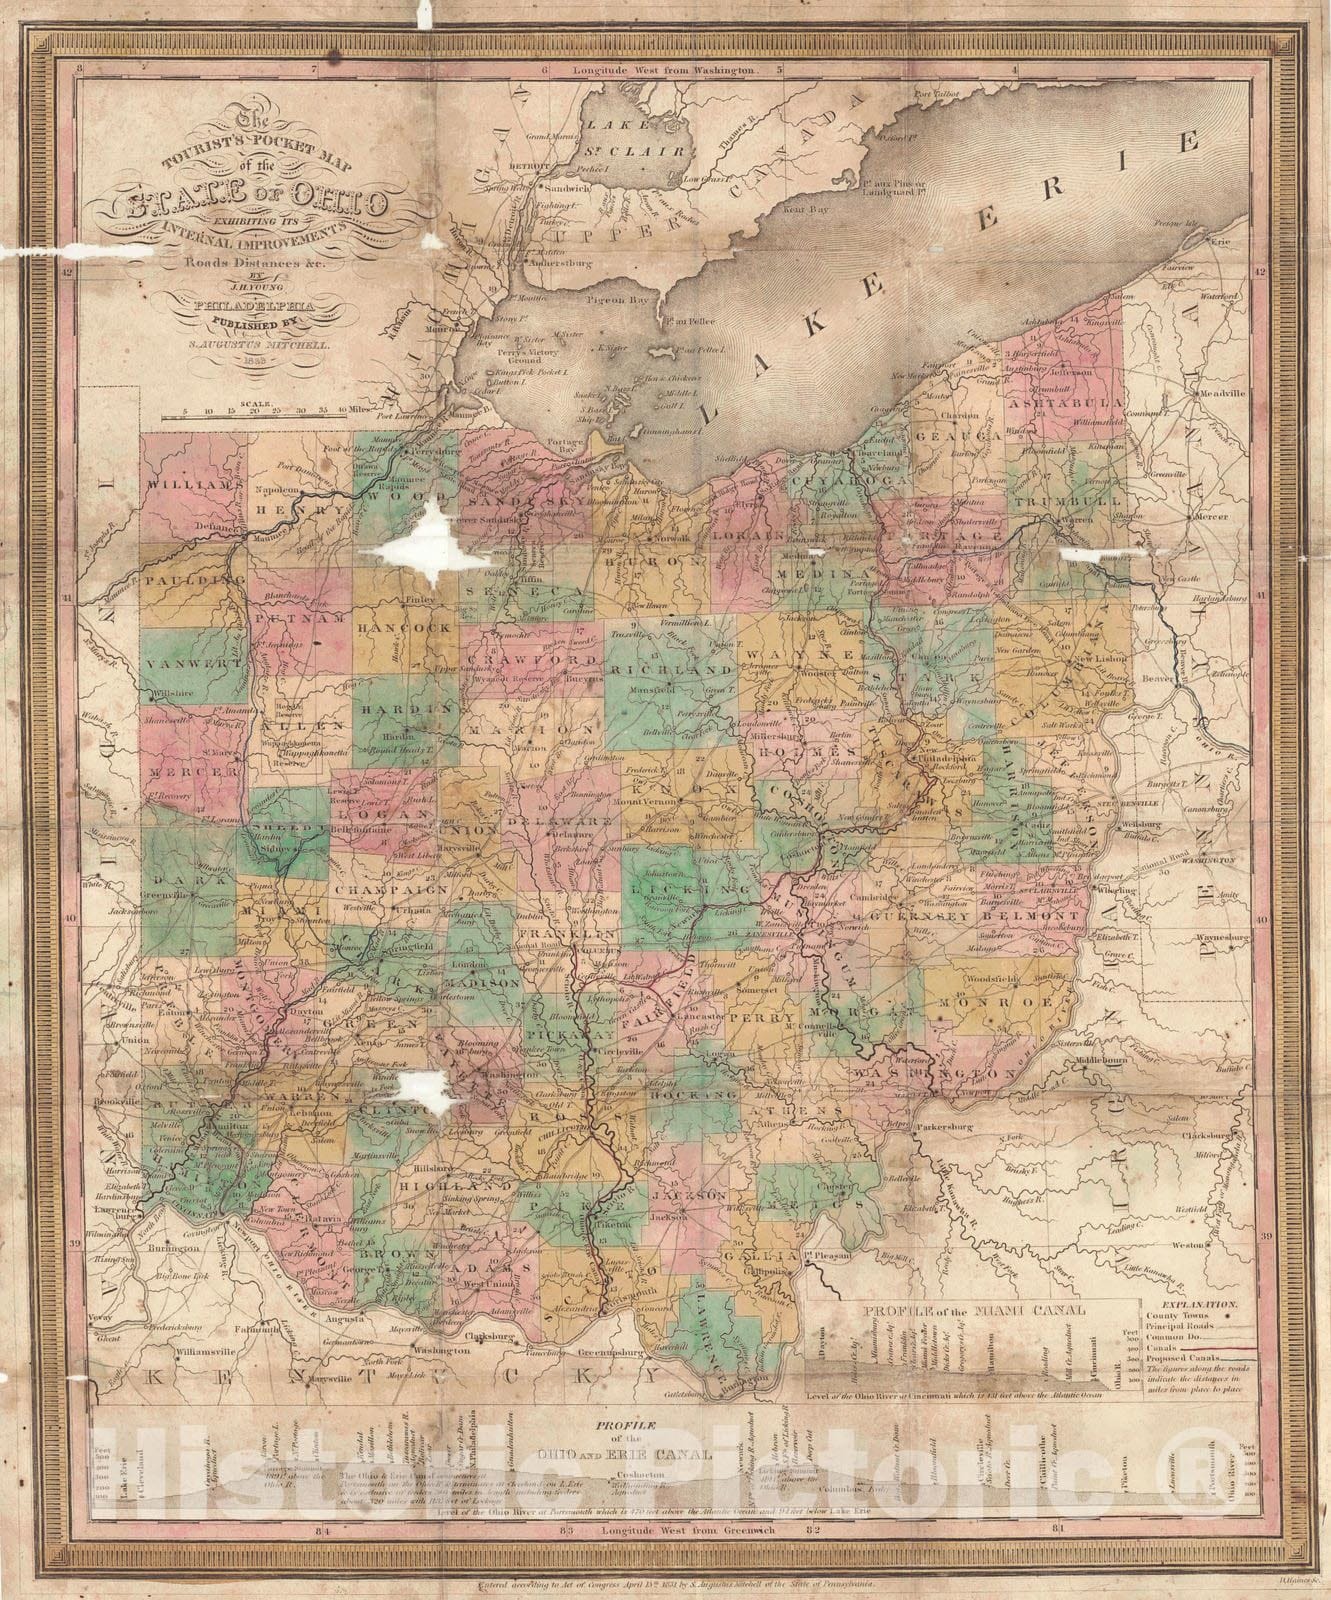 Historic Map : 1833 Tourists Pocket Map of the State of Ohio : Vintage Wall Art